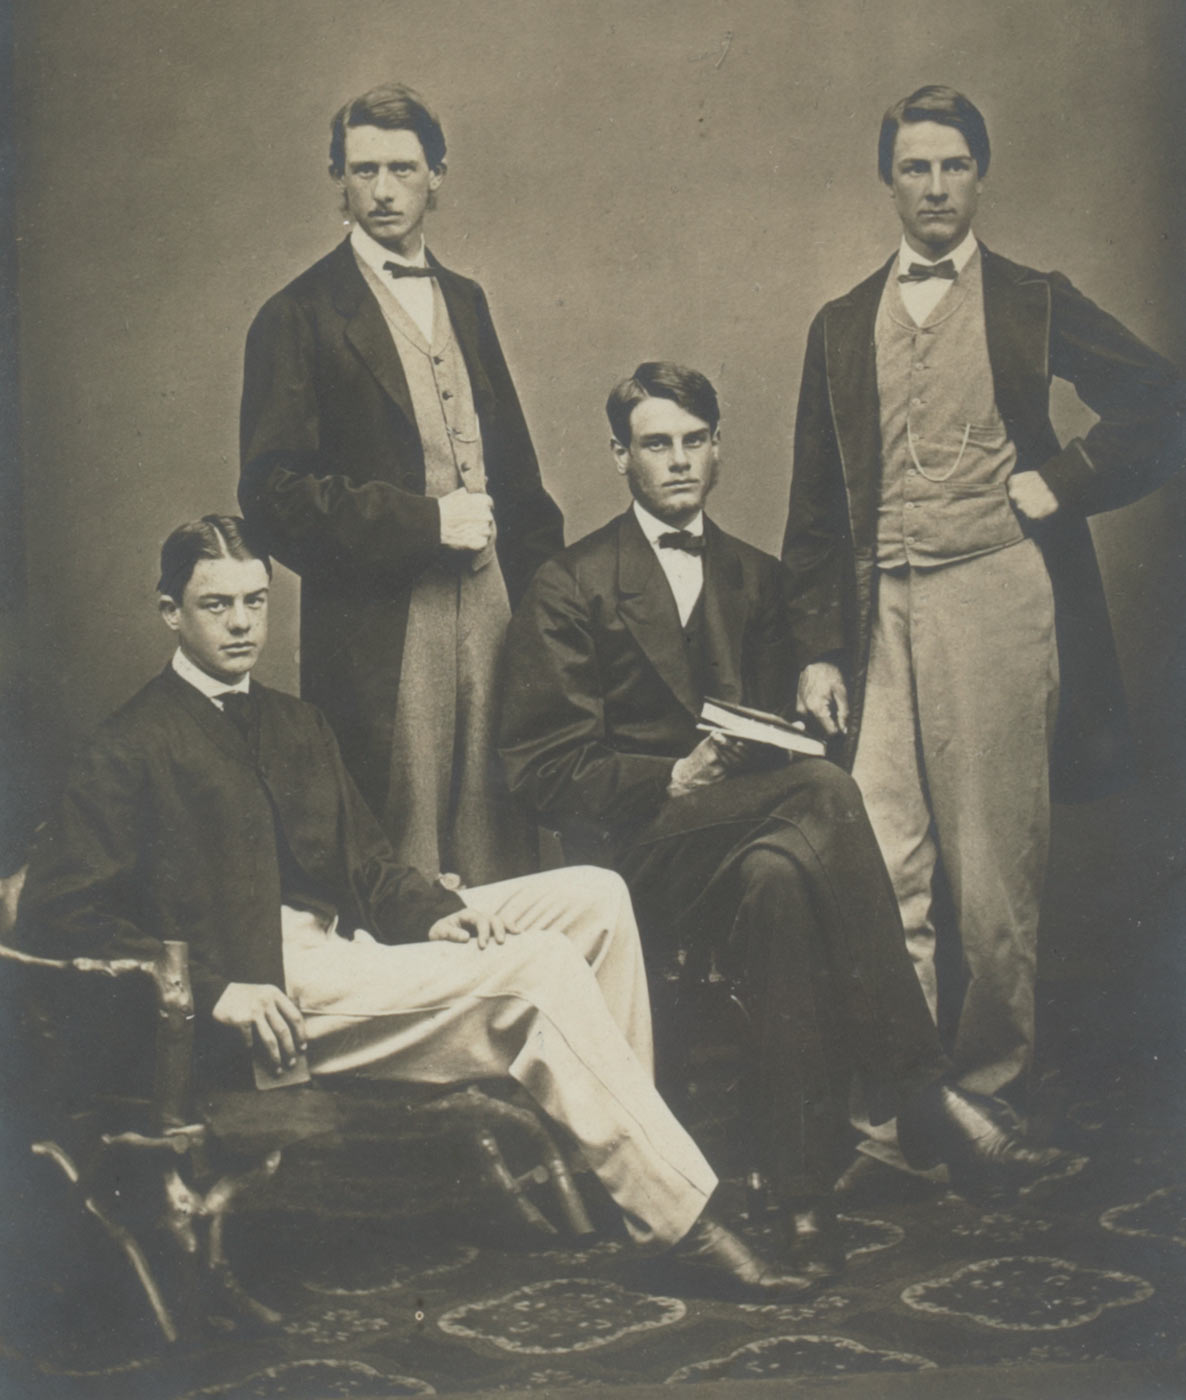 A black and white portrait photograph of four men, two seated and two standing, all wearing suits and bowties. The photograph is set on a grey mount and in a light brown wooden frame with recessed gold interior edging. It depicts standing, on left, William Percy, on right, George Ernest; seated on left, Reginald, on right Henry Montague. Handwritten on mount 